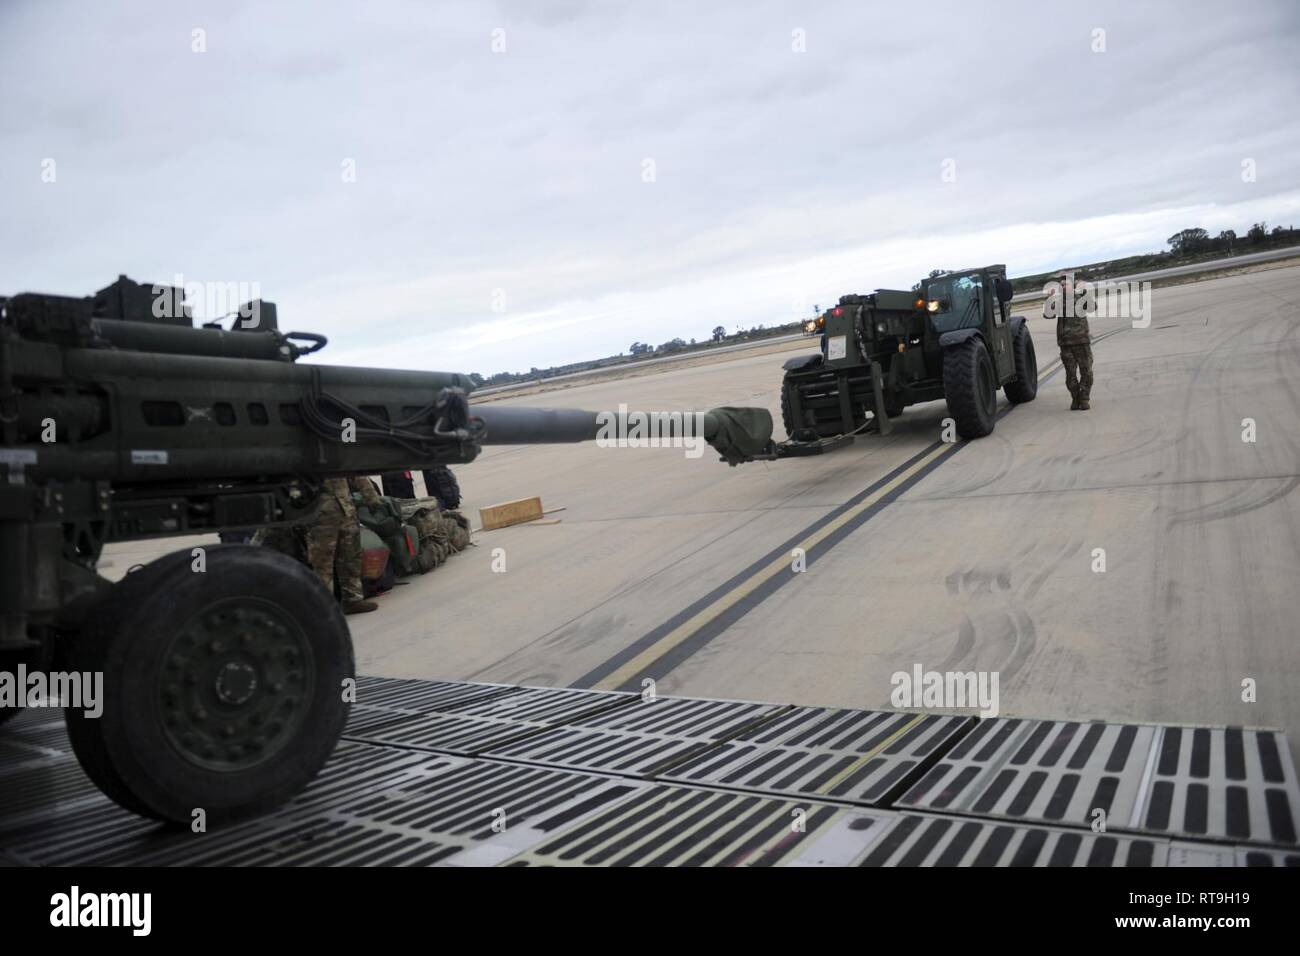 NAVAL STATION ROTA, Spain (Jan. 29, 2019) Seabees assigned to Naval Mobile Construction Battalion (NMCB) 1 and U.S. Air Force (USAF) airmen assigned to the 22nd Airlift Squadron download a U.S. Army M777 howitzer from a USAF C5M Super Galaxy during an embarkation operation. NMCB-1 is forward deployed to execute construction, humanitarian and foreign assistance, and theater security cooperation in the U.S. 6th Fleet area of operations. Stock Photo